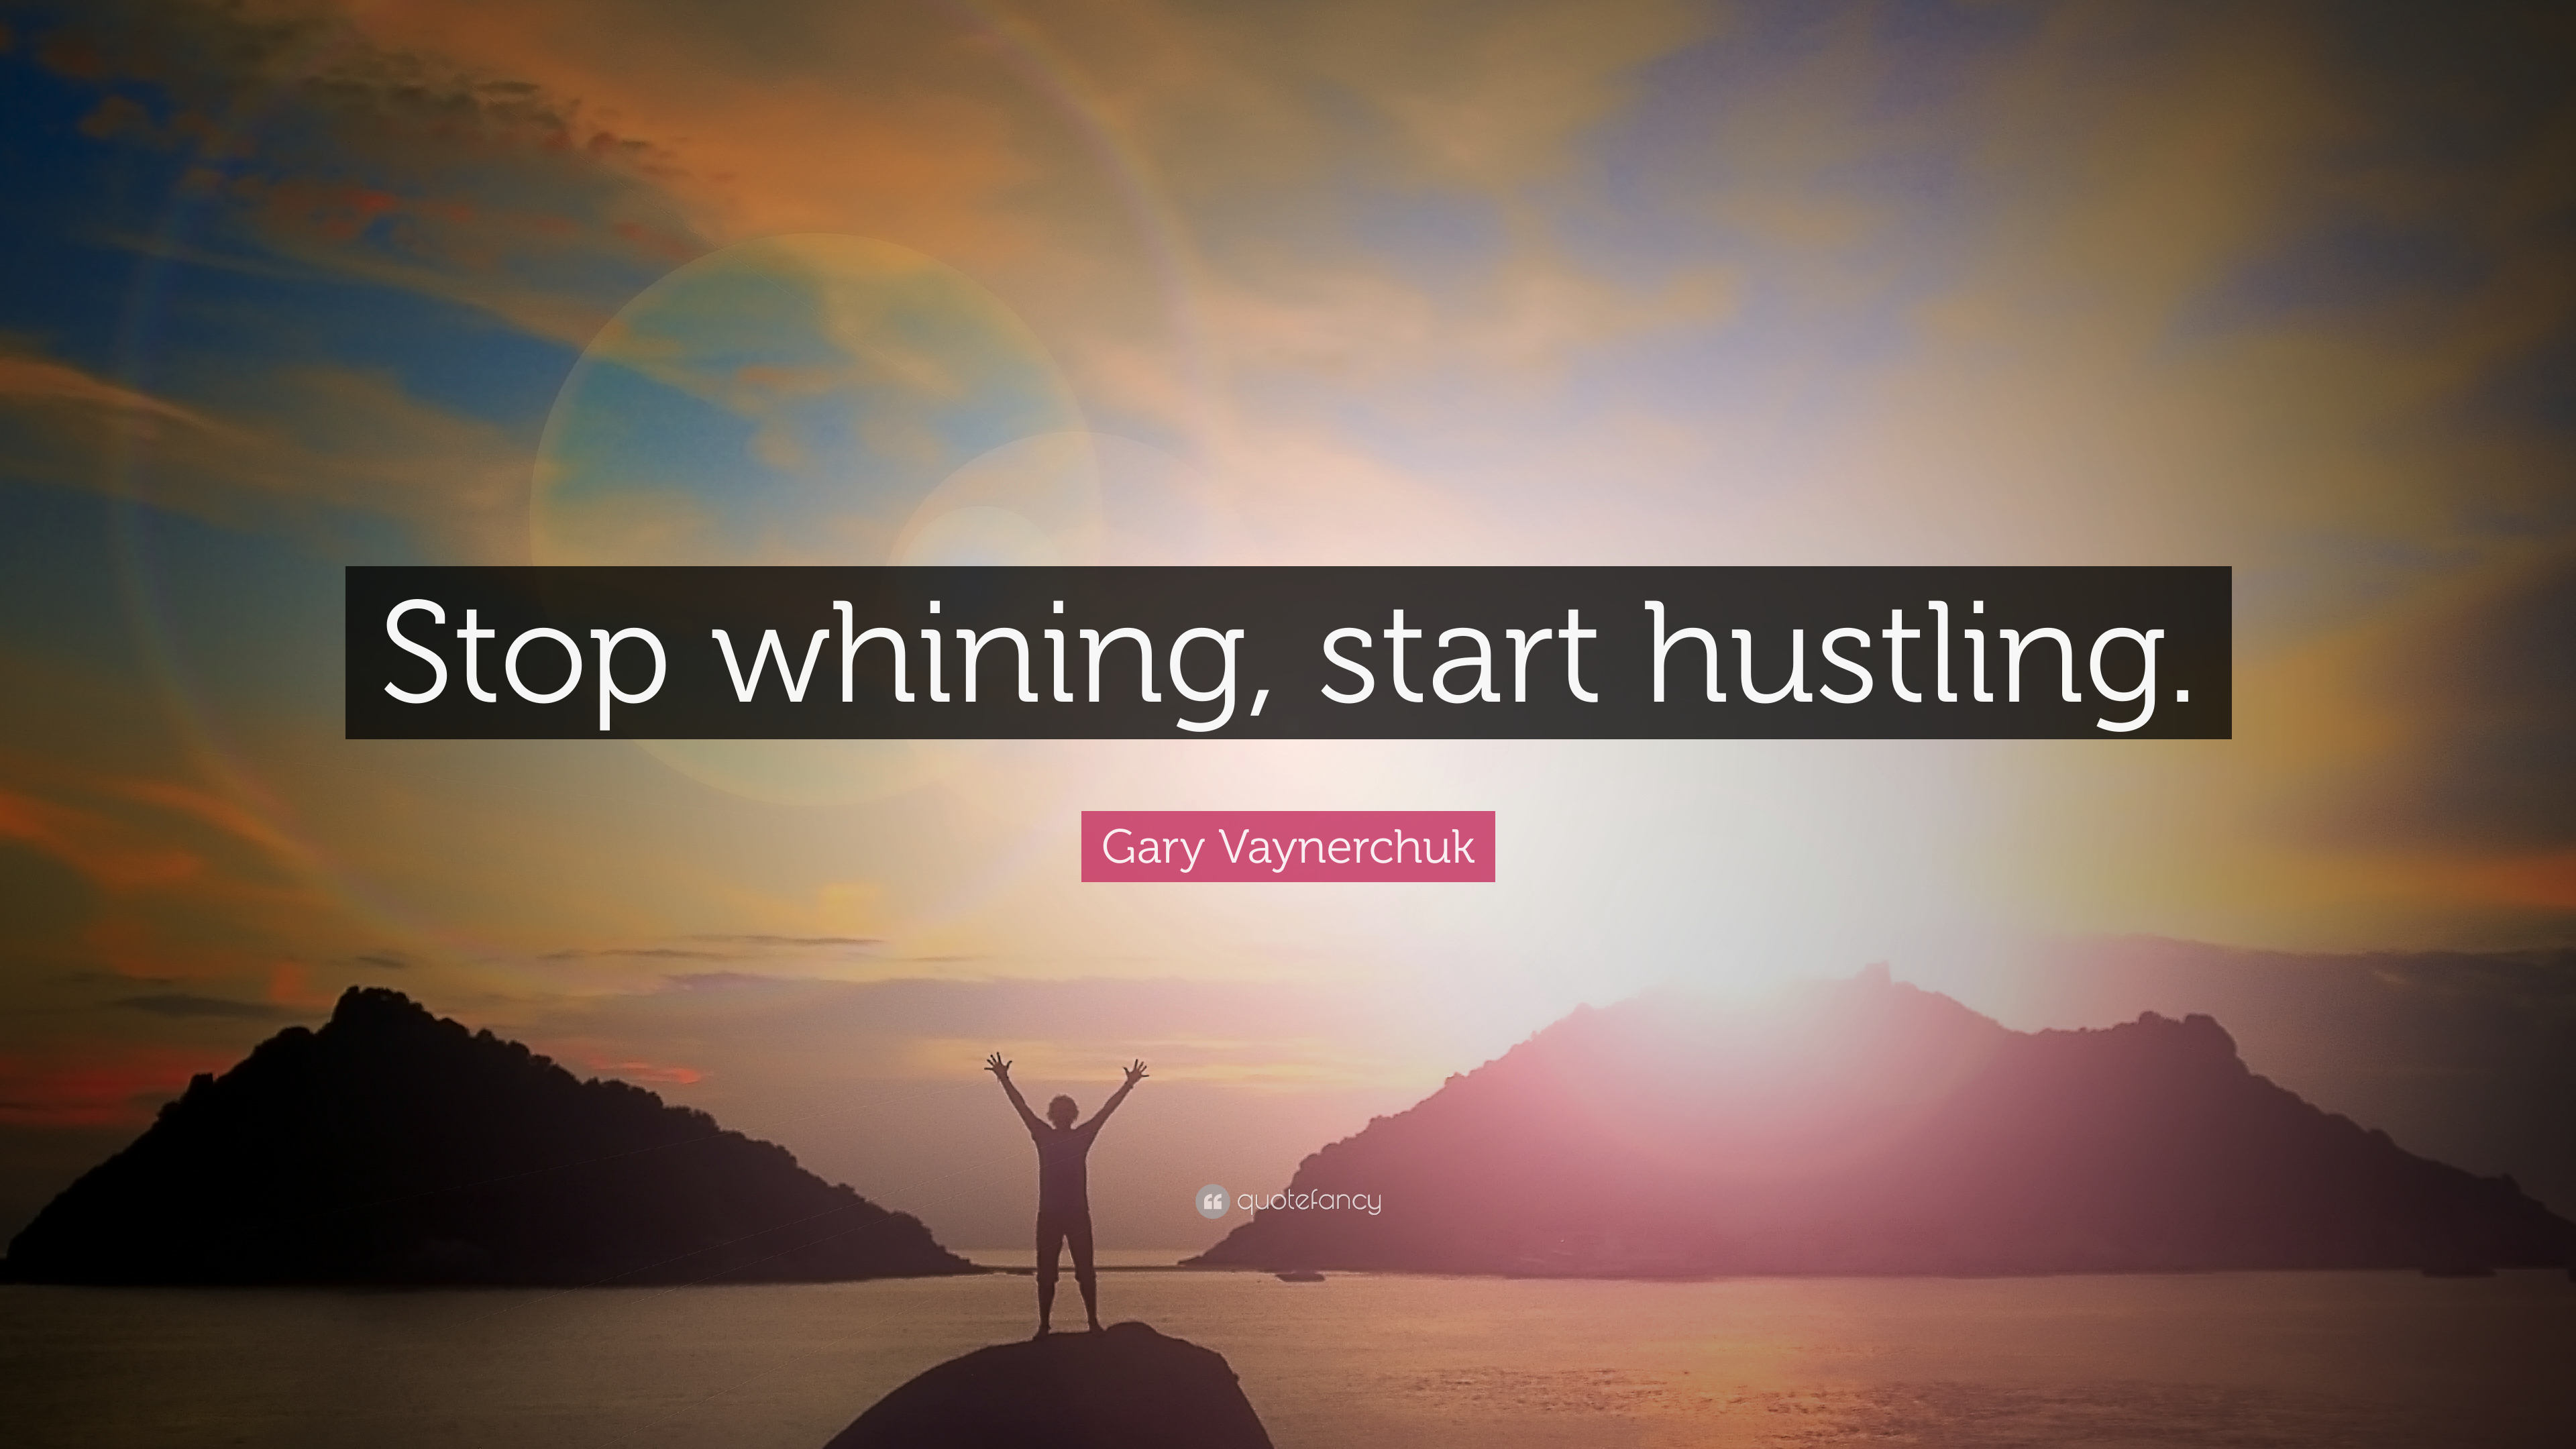 Gary Vaynerchuk Quote - If It's Going To Be It's Up - HD Wallpaper 